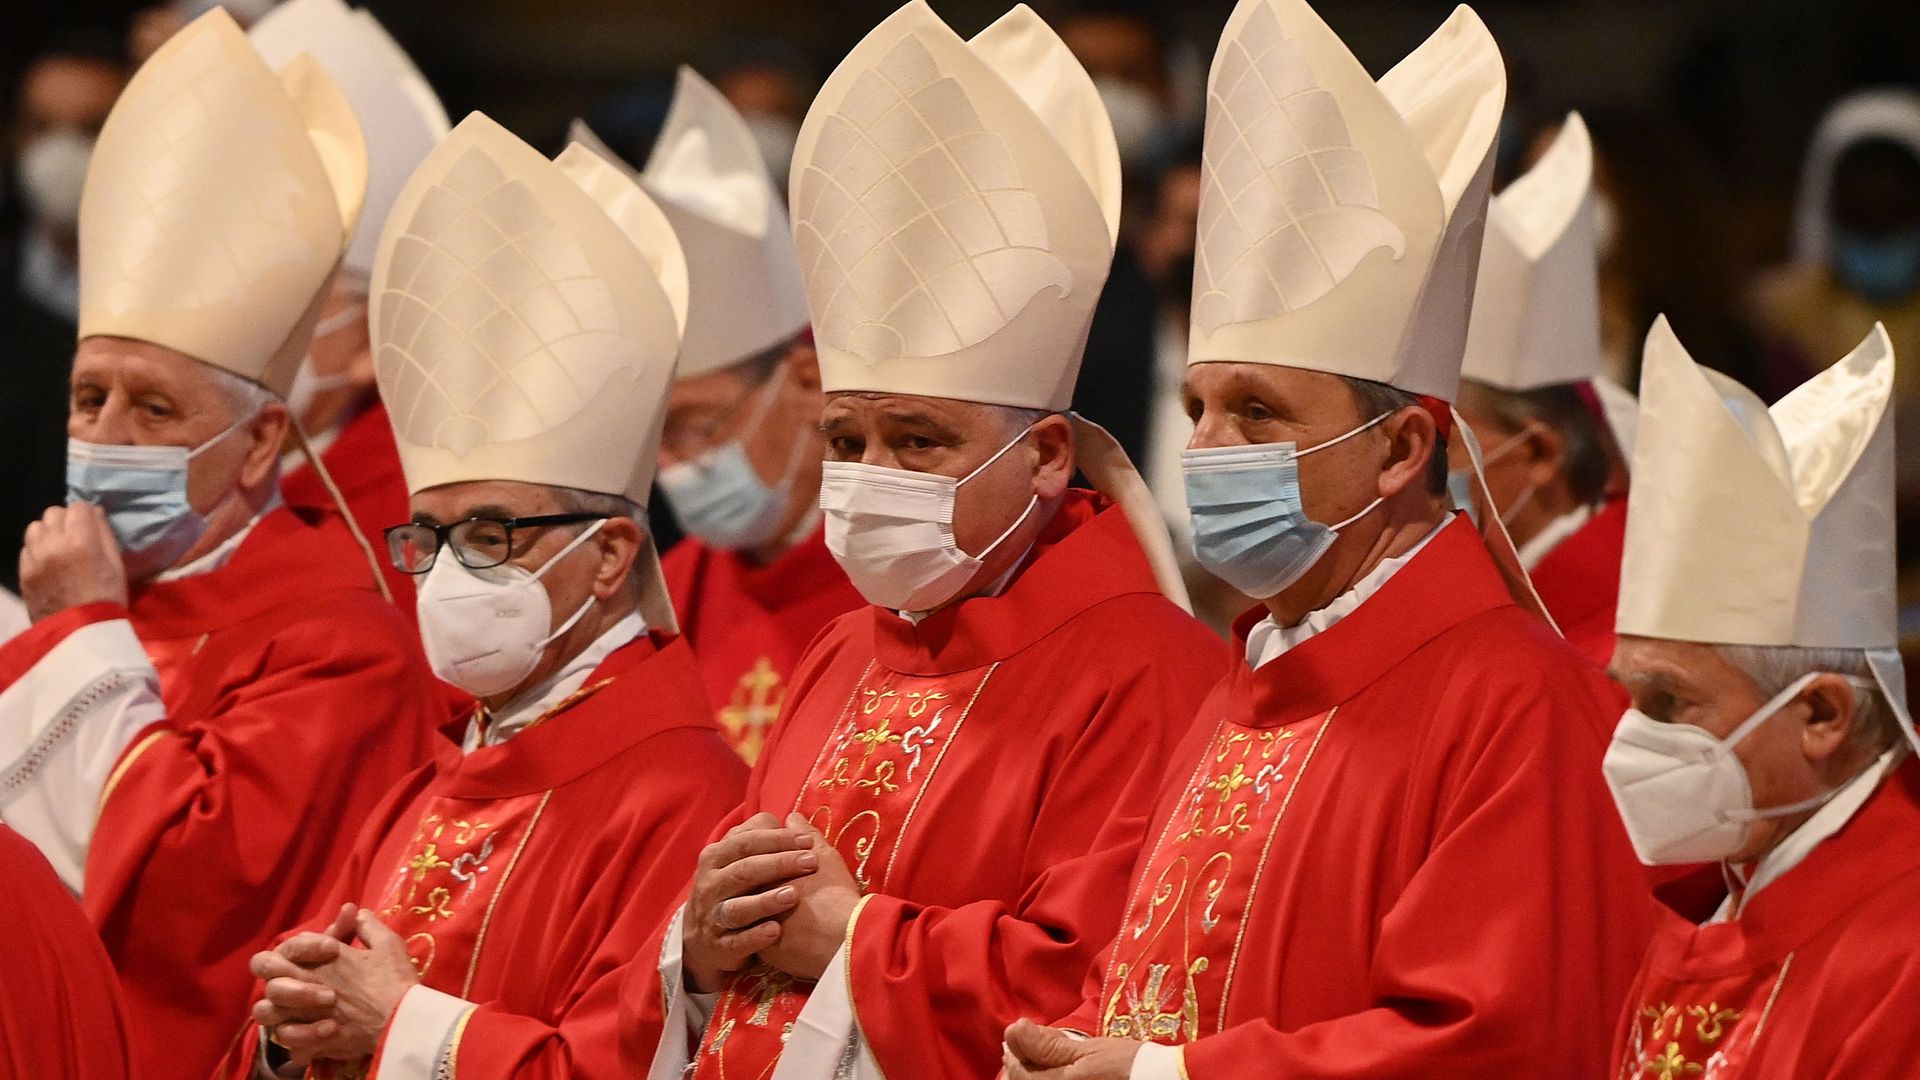 A group of real cardinals and bishops at the Vatican - Credit: Photo: Vincenzo Pinto/AFP via Getty Images